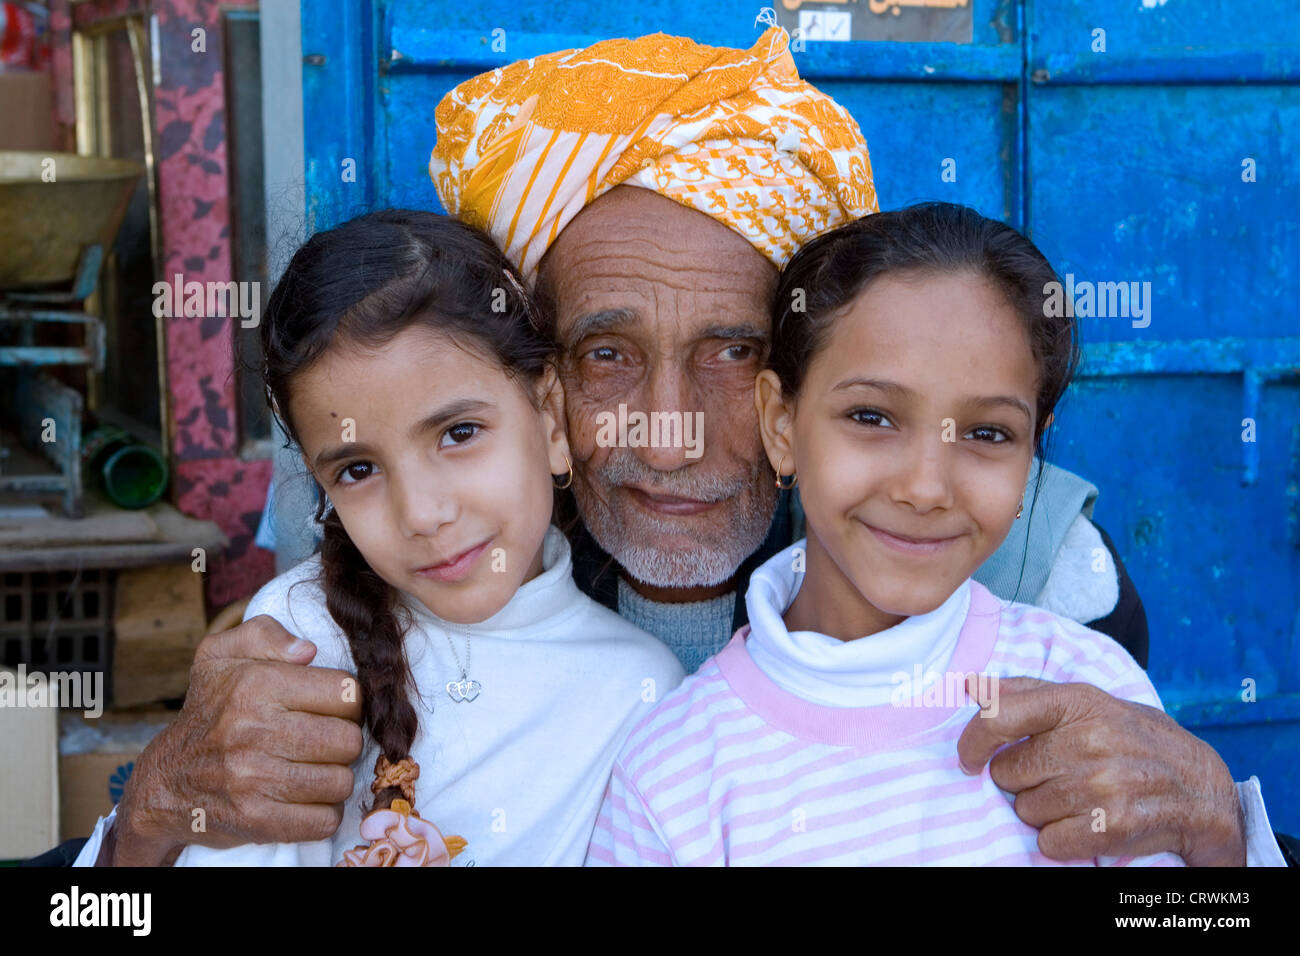 Old man young girl pictures